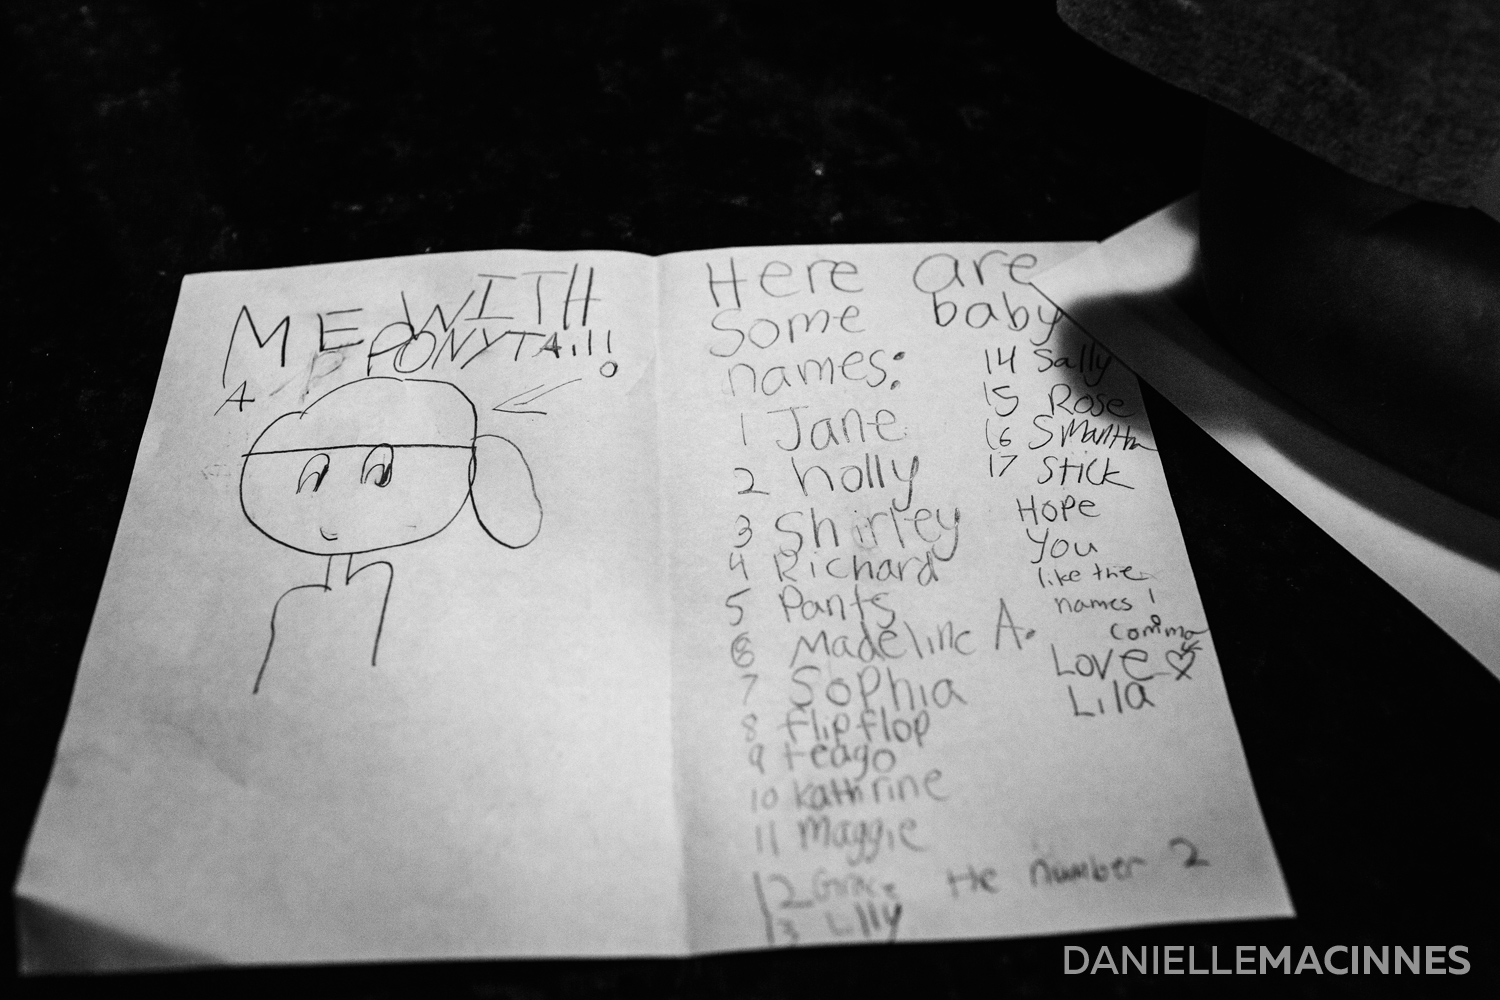 List of baby names in child's handwriting